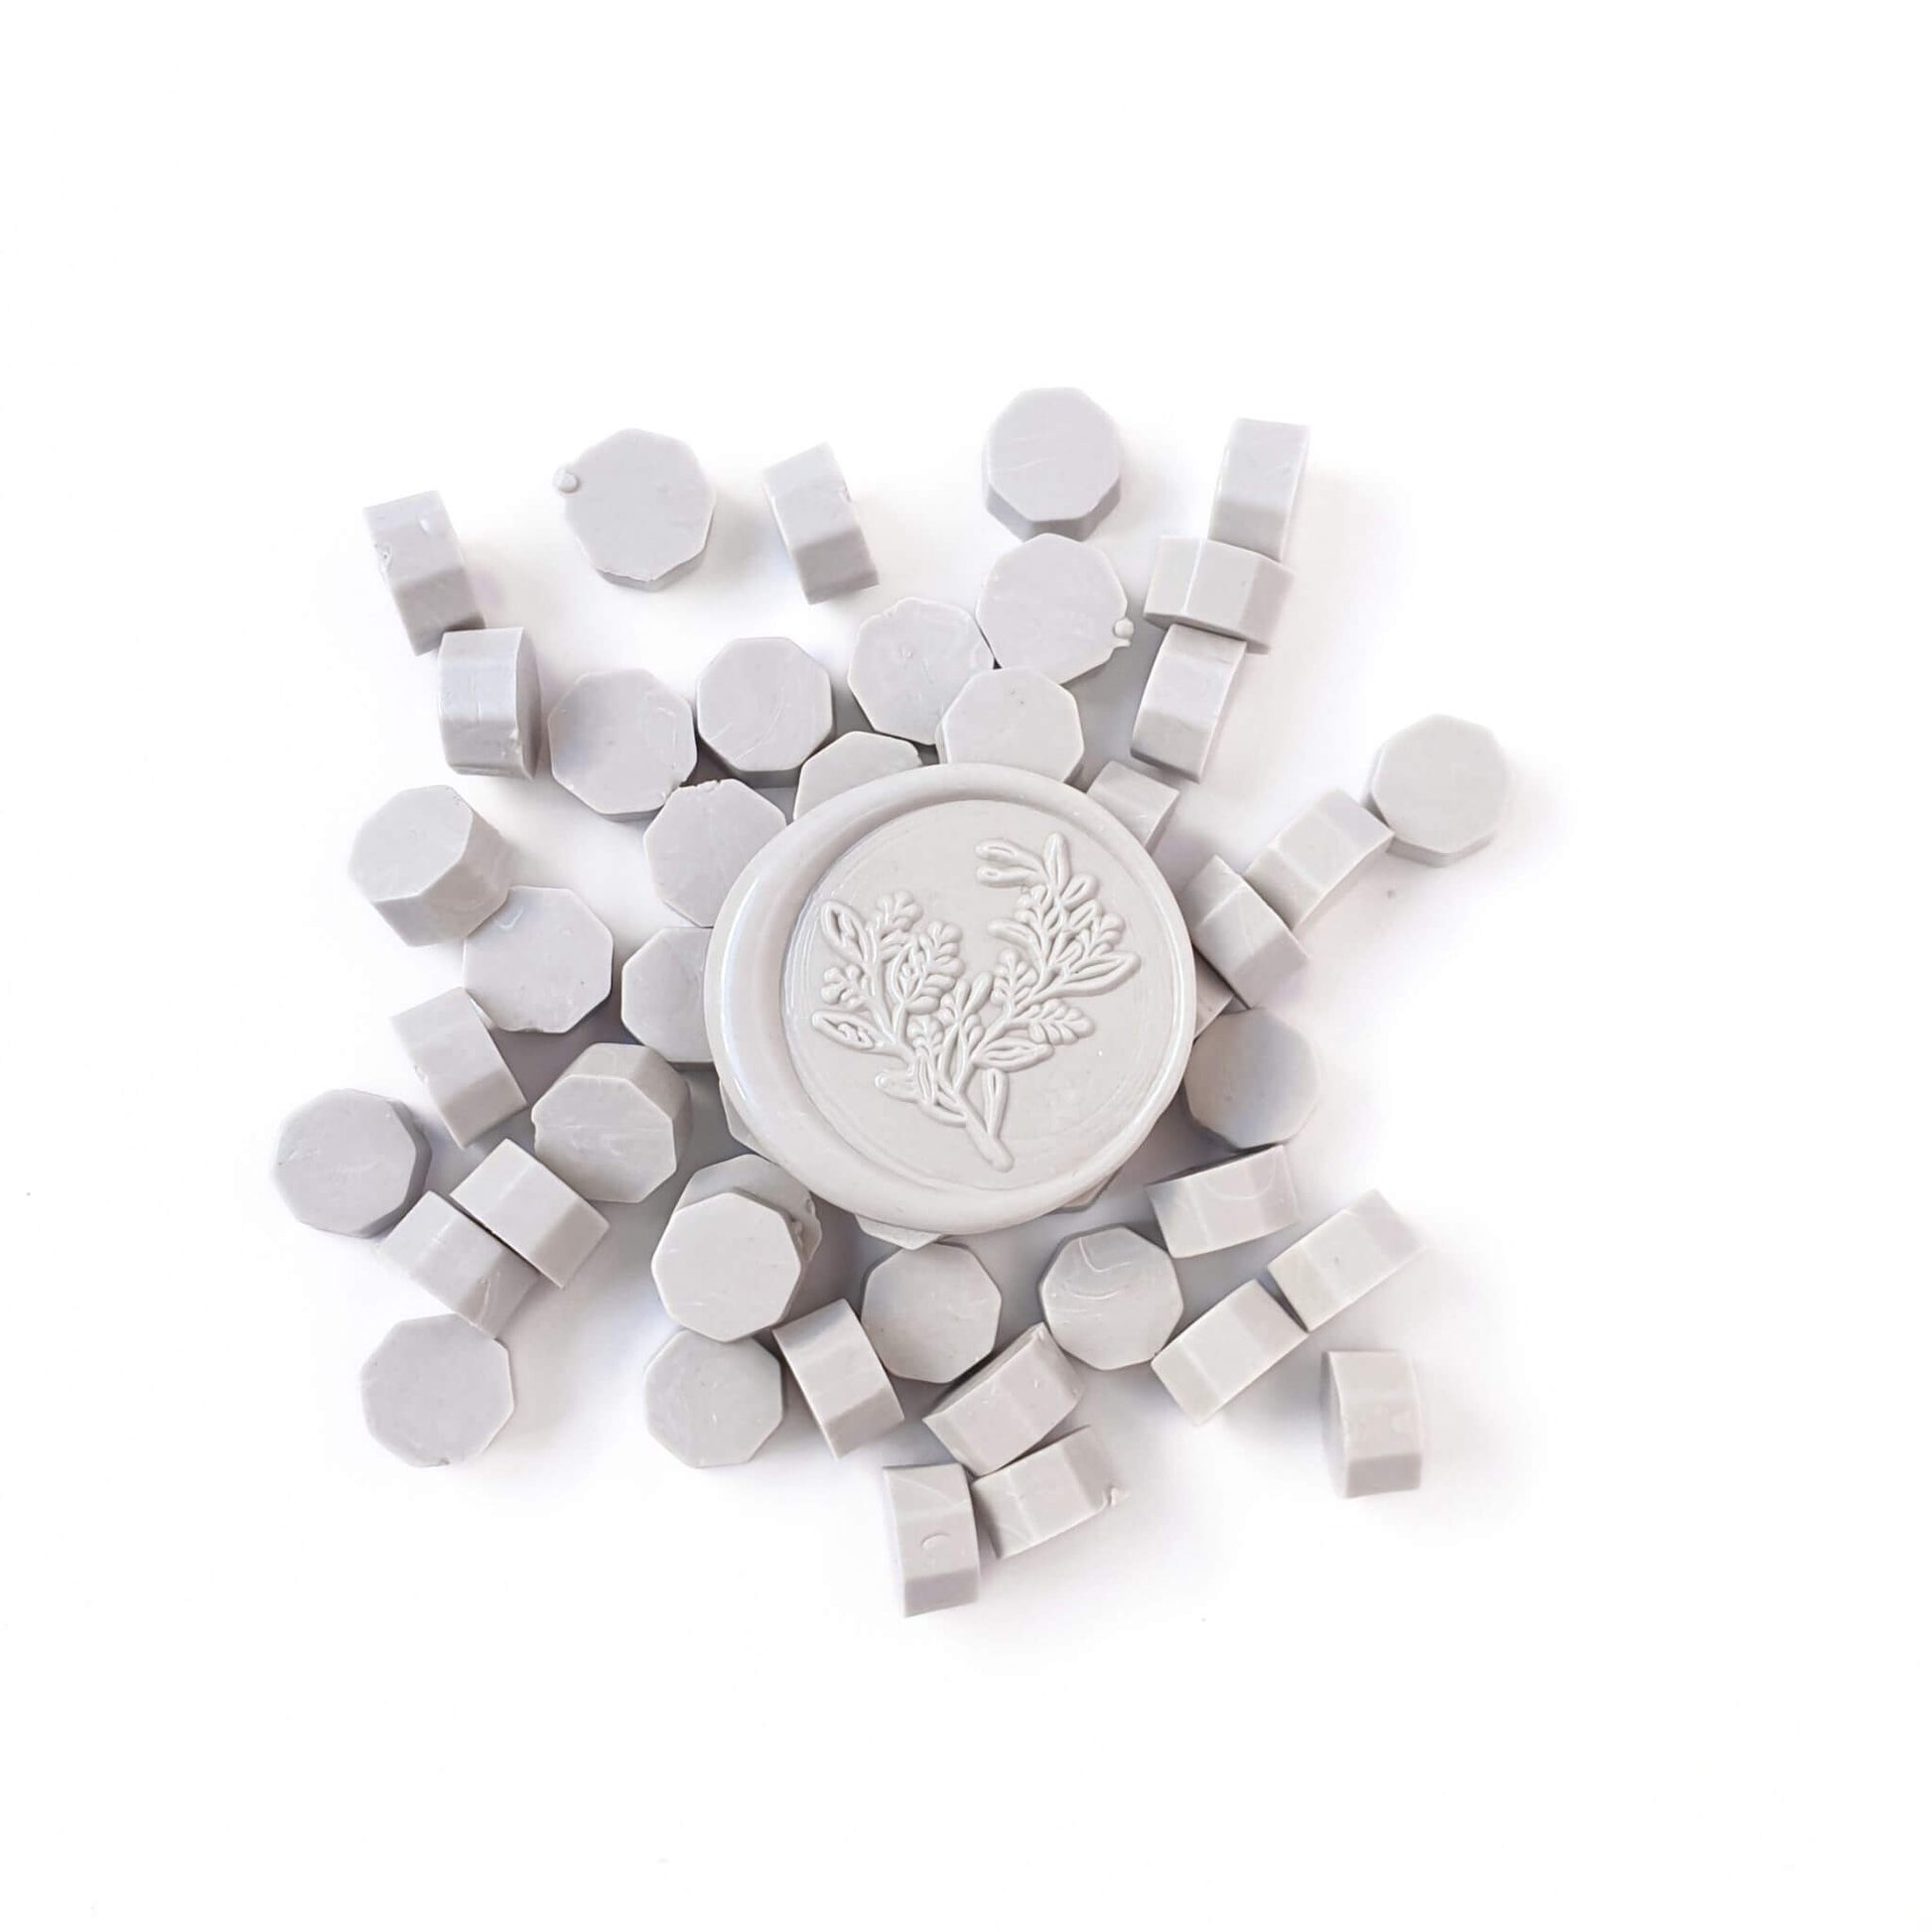 Dove grey wax sealing beads in a pile with a light grey wax seal in the middle